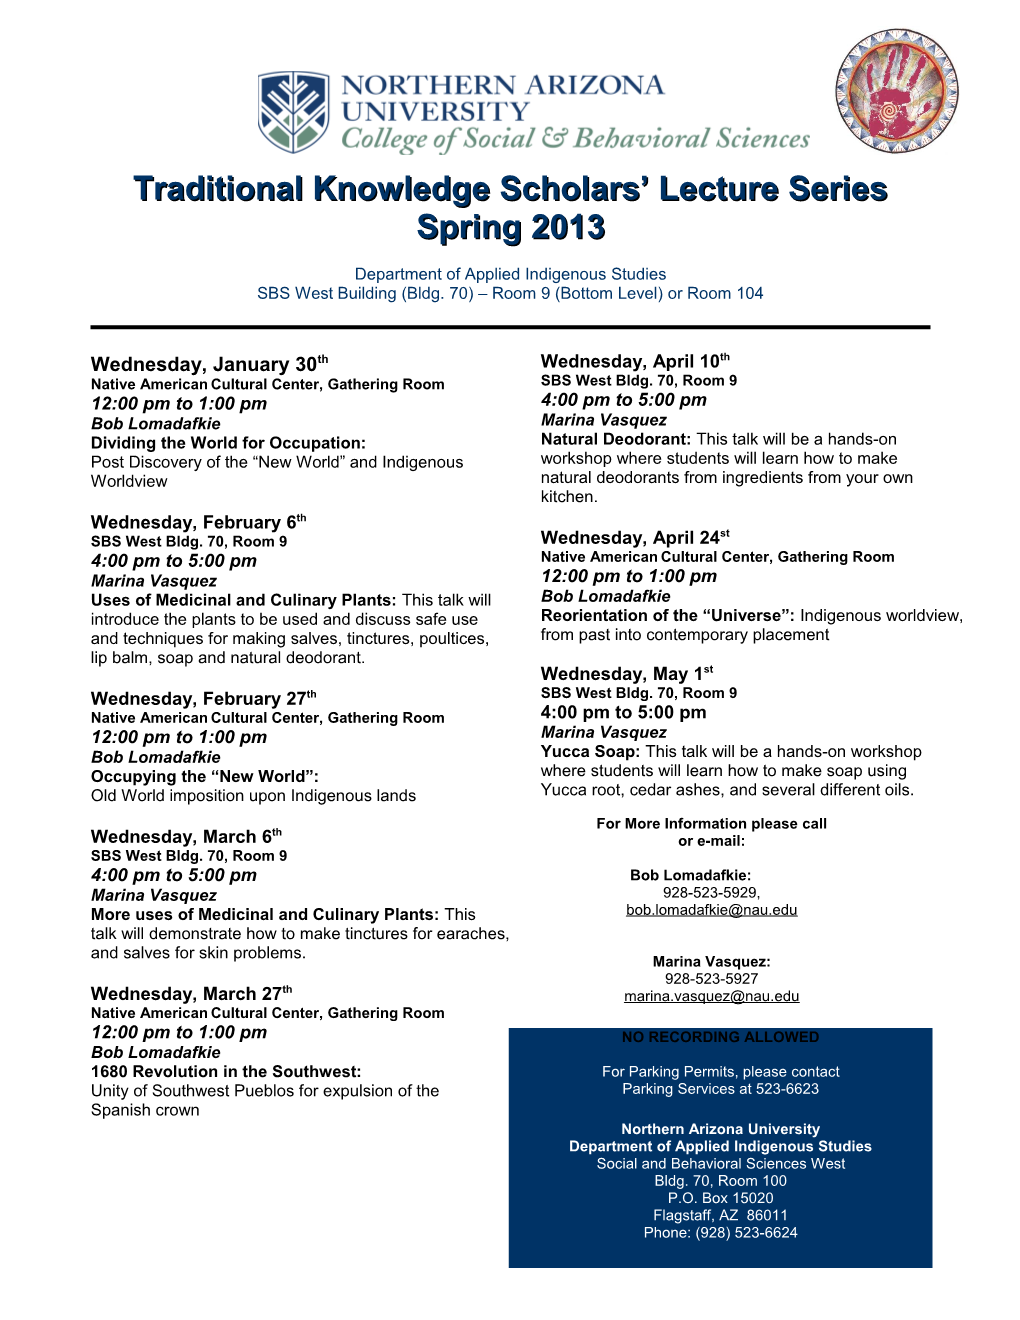 Traditional Knowledge Scholars Lecture Series